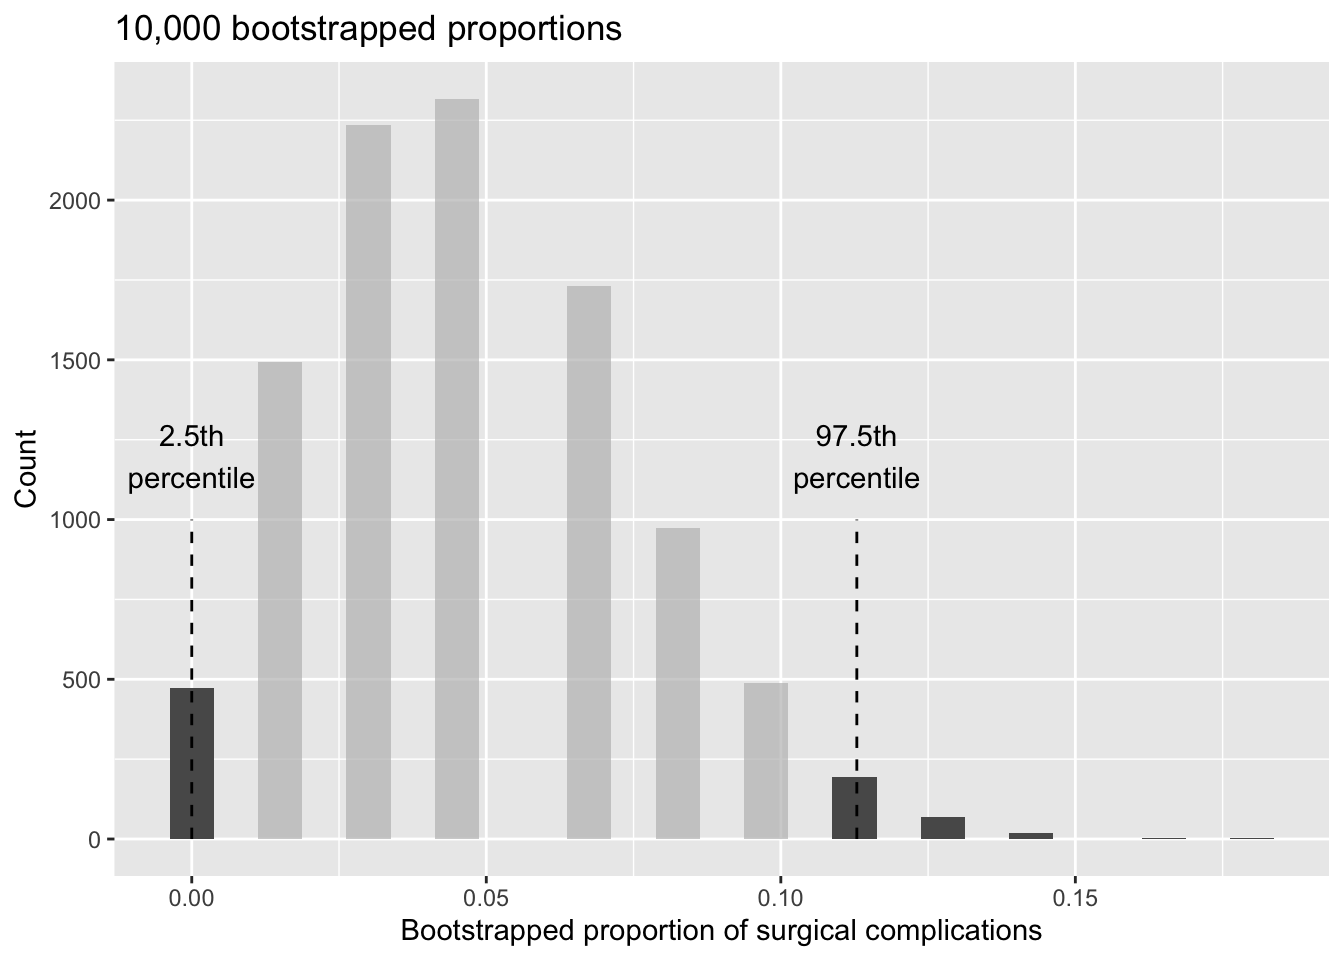 The original medical consultant data is bootstrapped 10,000 times. Each simulation creates a sample from the original data where the probability of a complication is \(\hat{p} = 3/62.\) The bootstrap 2.5 percentile proportion is 0 and the 97.5 percentile is 0.113. The result is: we are 95% confident that, in the population, the true probability of a complication is between 0% and 11.3%.